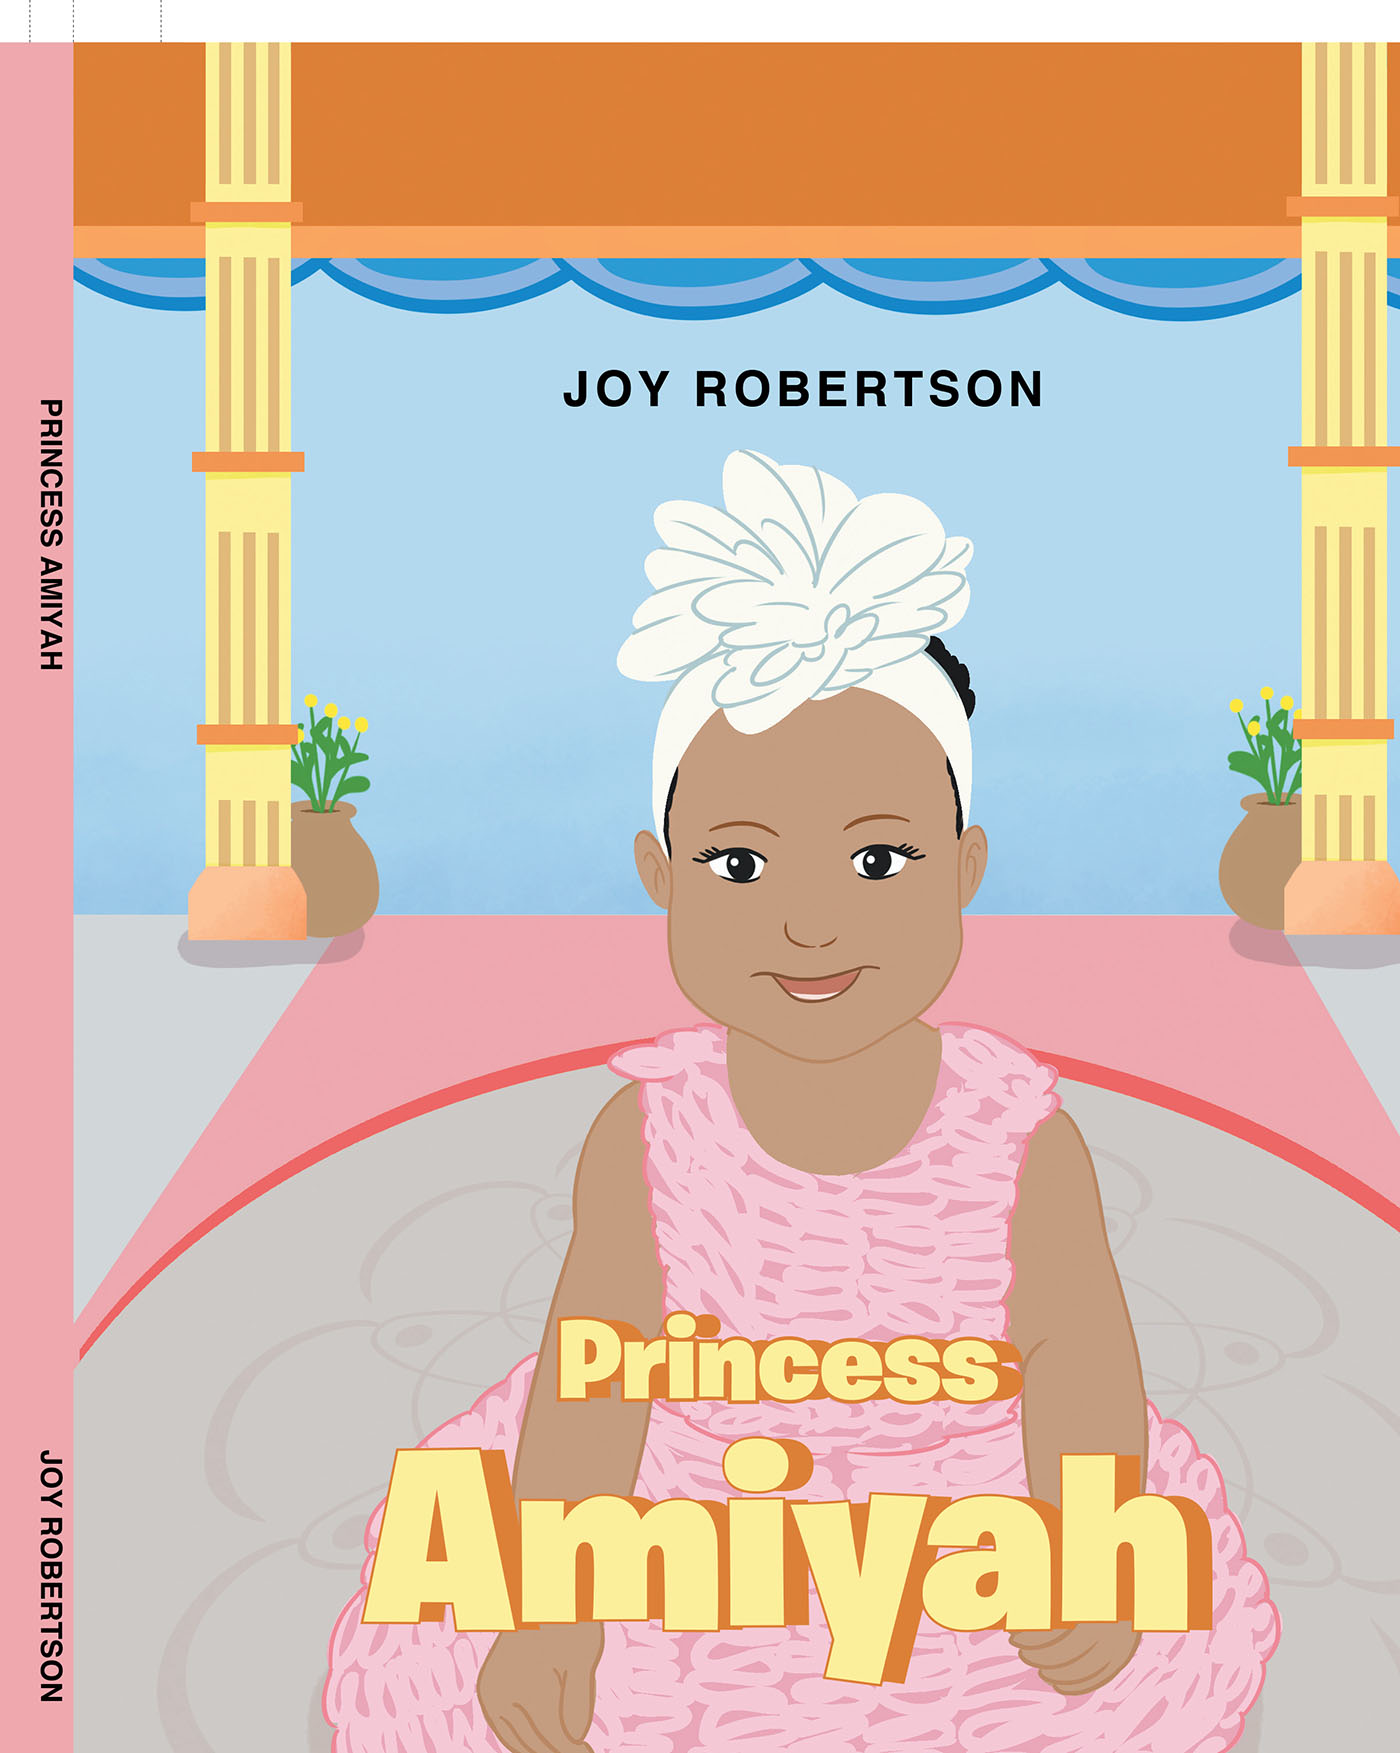 Joy Robertson’s Newly Released "Princess Amiyah: Volume 1" is a Charming Tale of a Powerful Gift from God and a Benevolent Princess